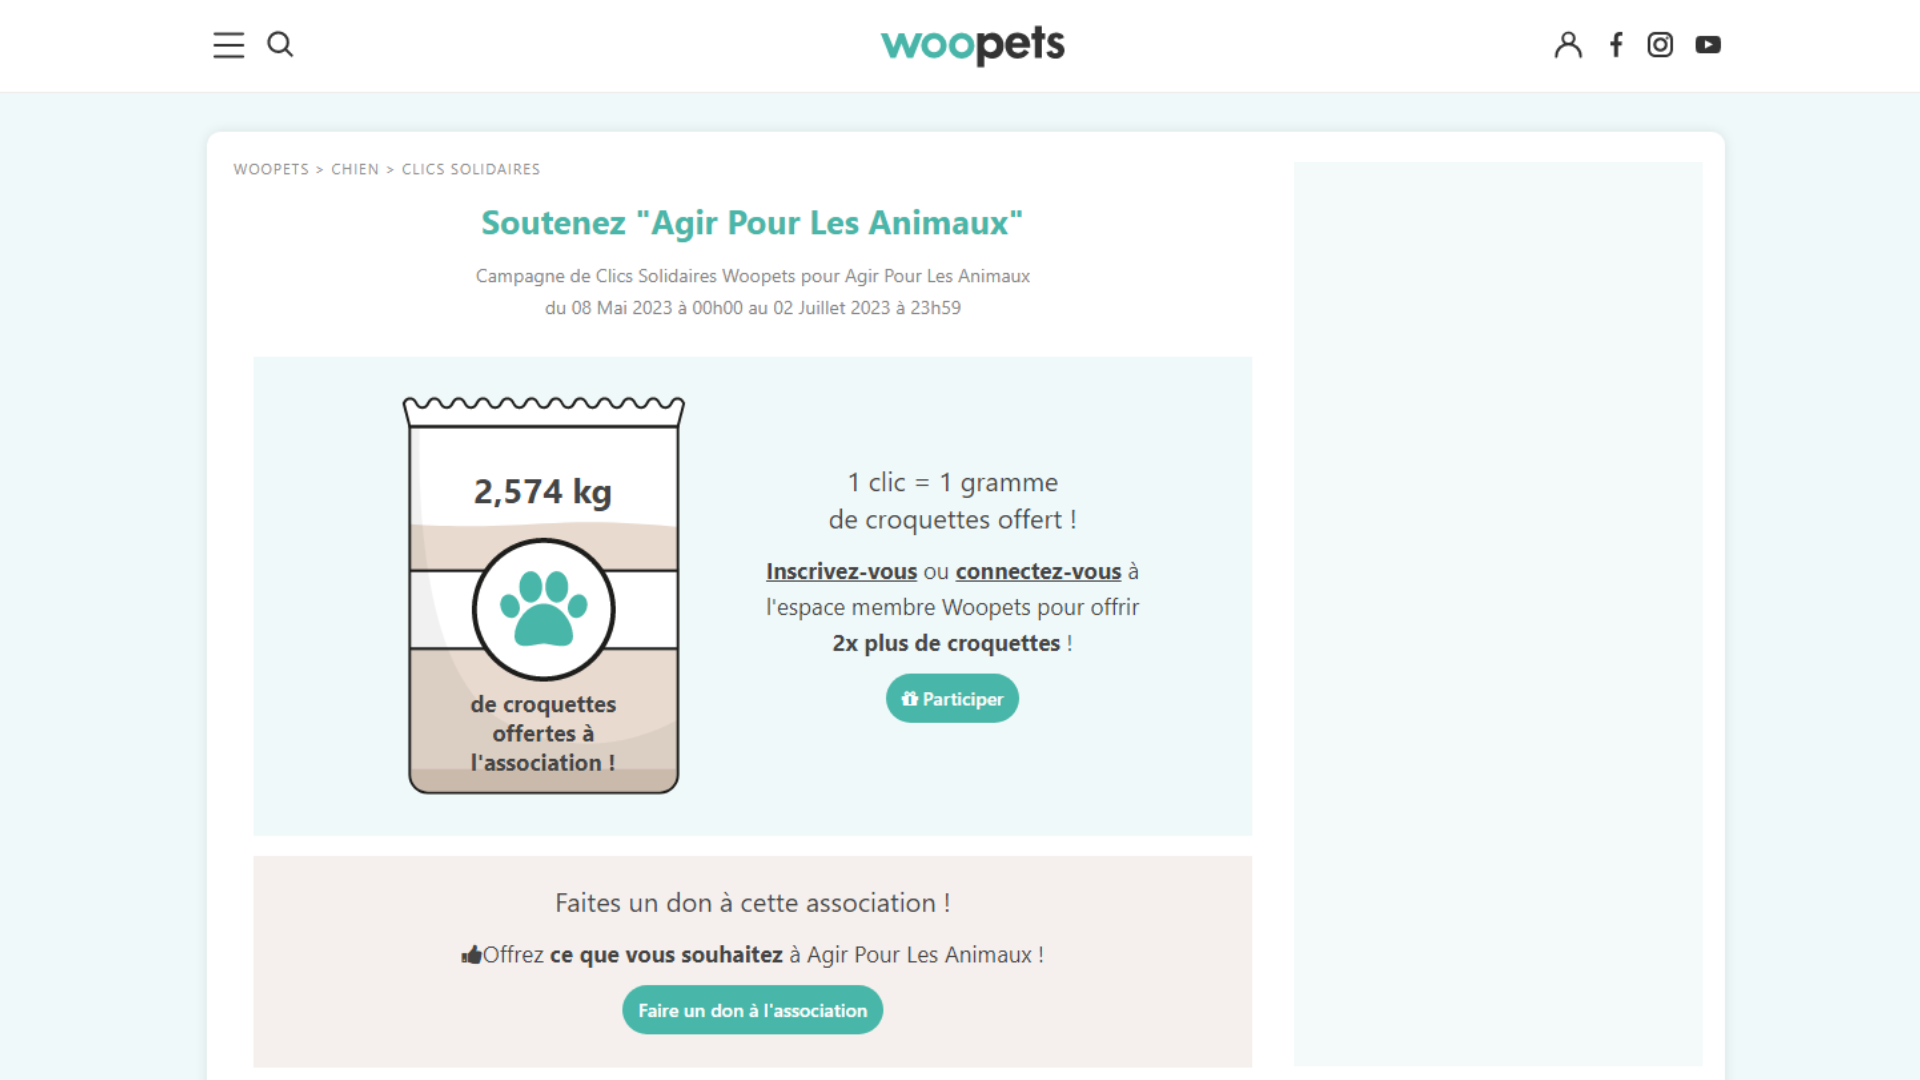 CLICS SOLIDAIRES WOOPETS